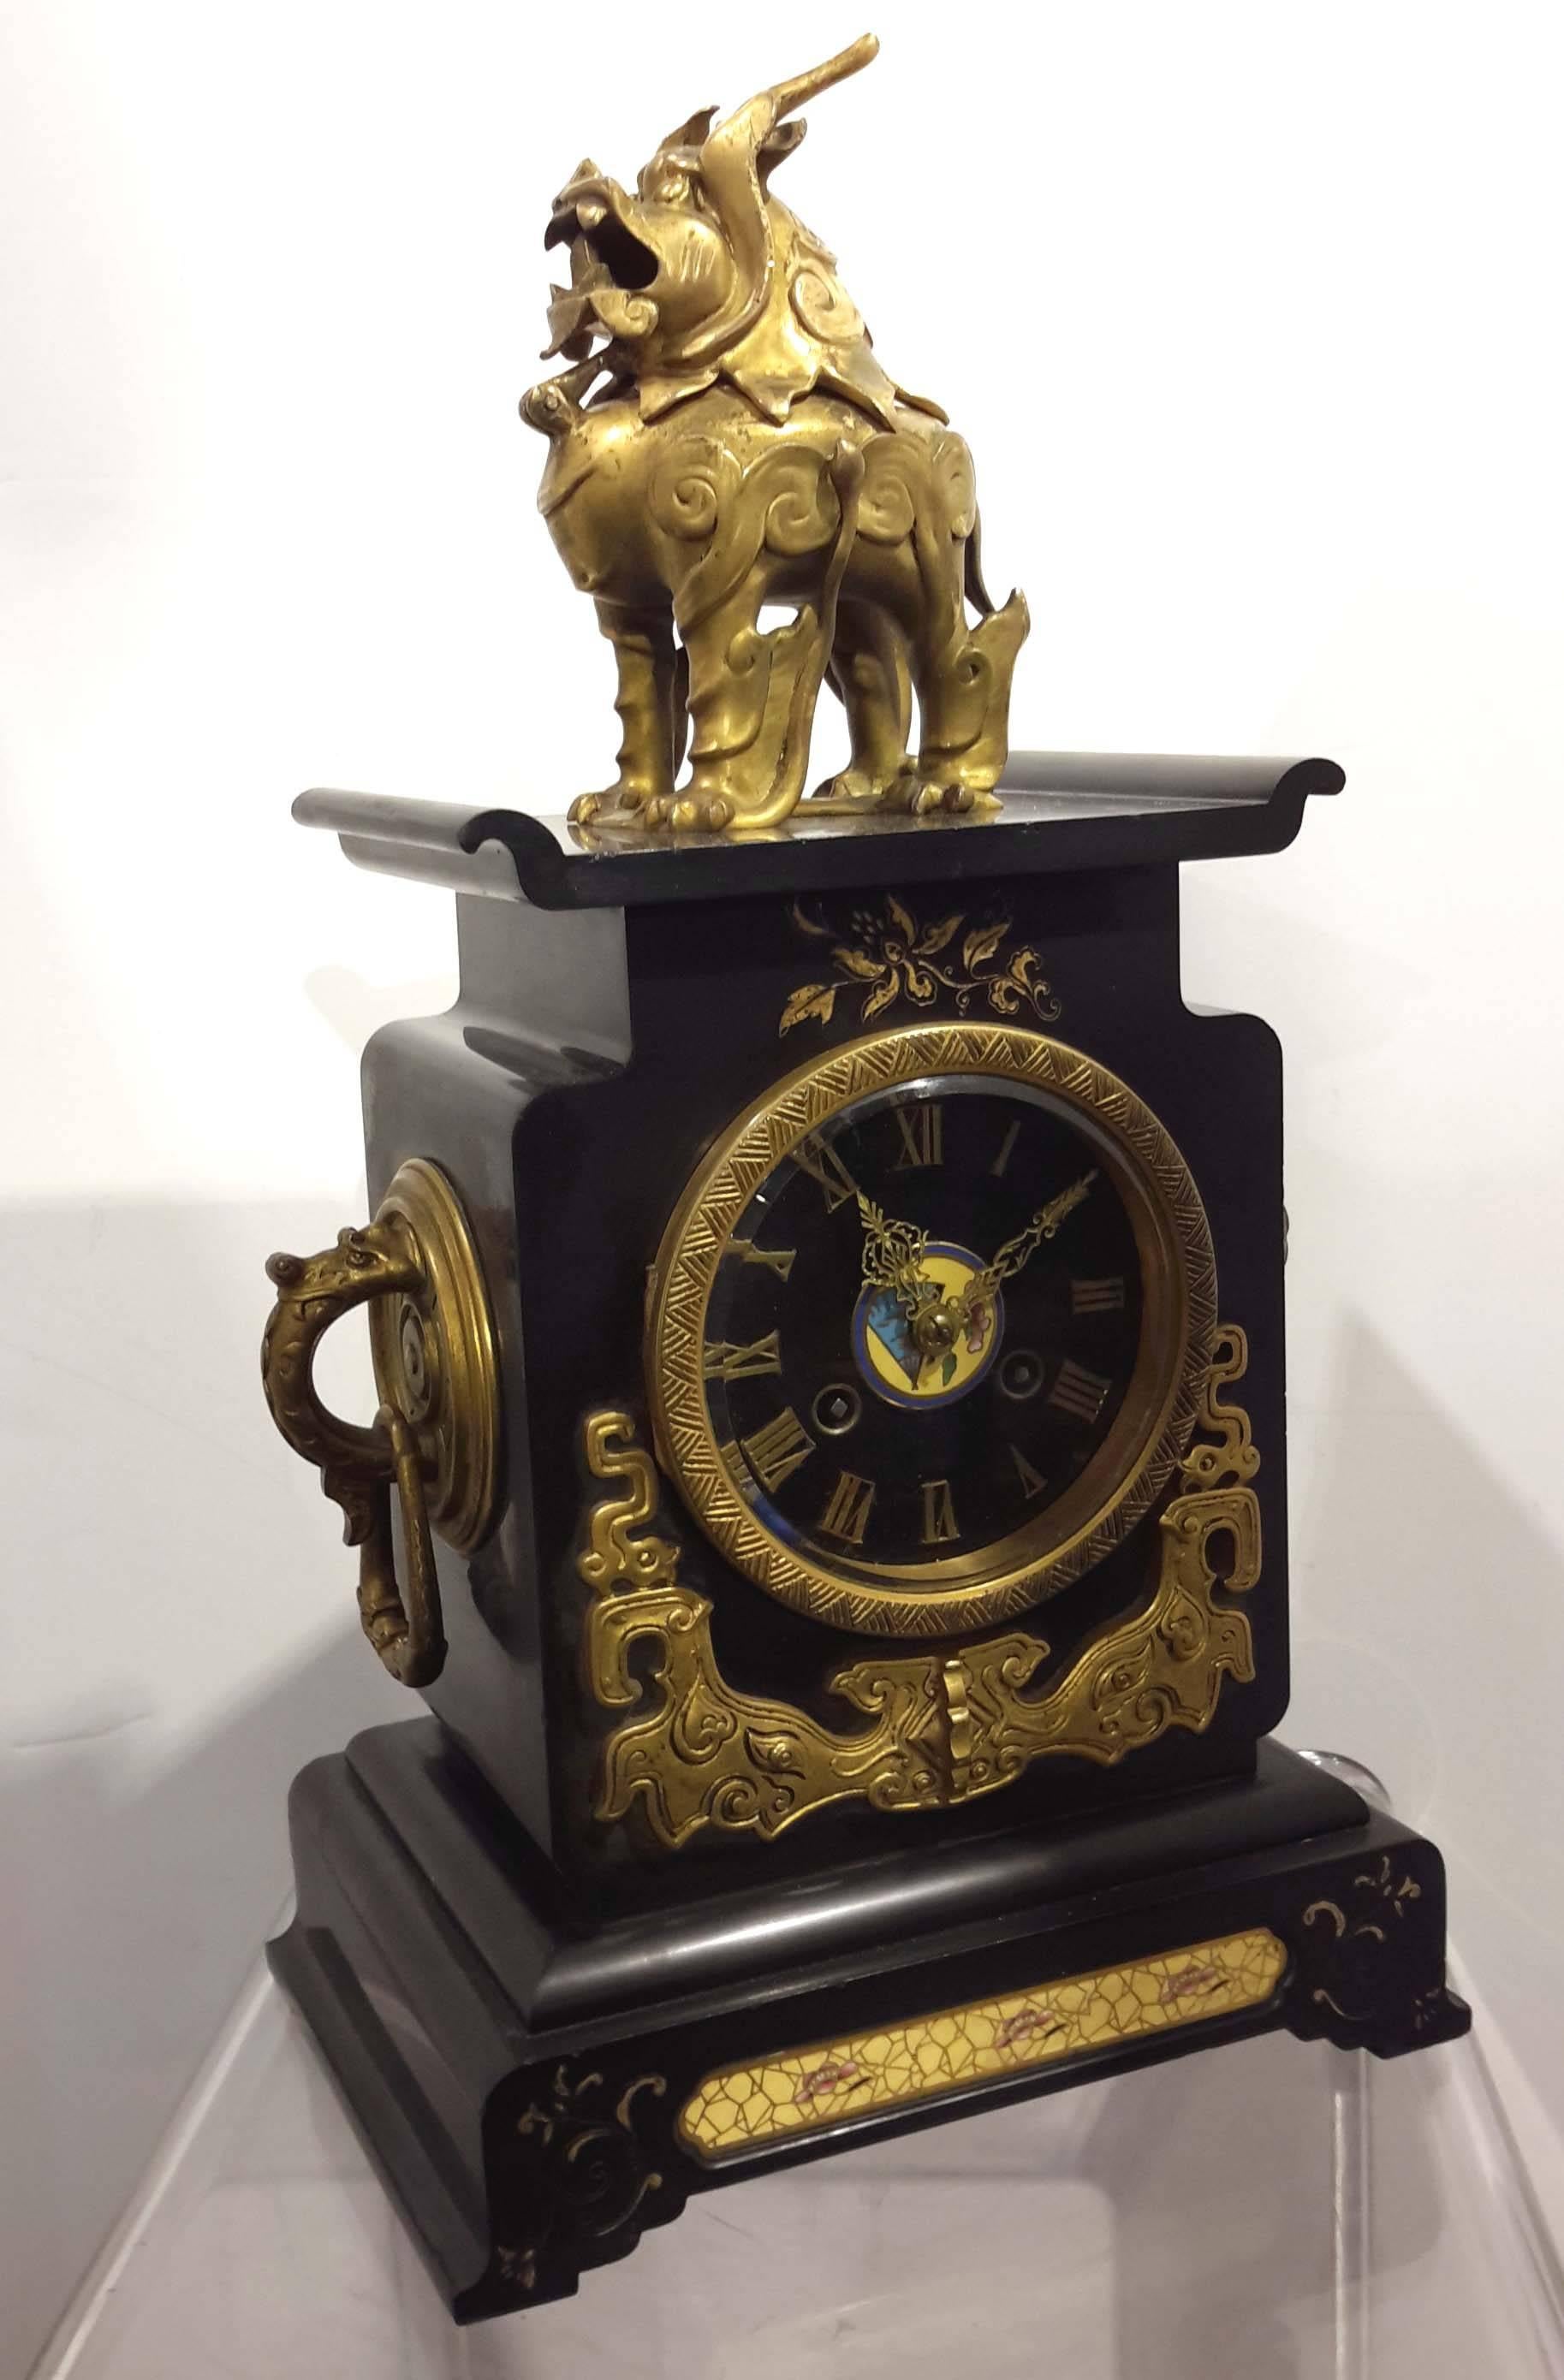 Gilt bronze, cloisonne and black Belgium marble. Movement stamped Tiffany, New York. The bronze foo-dog opens to be used as an incense burner.